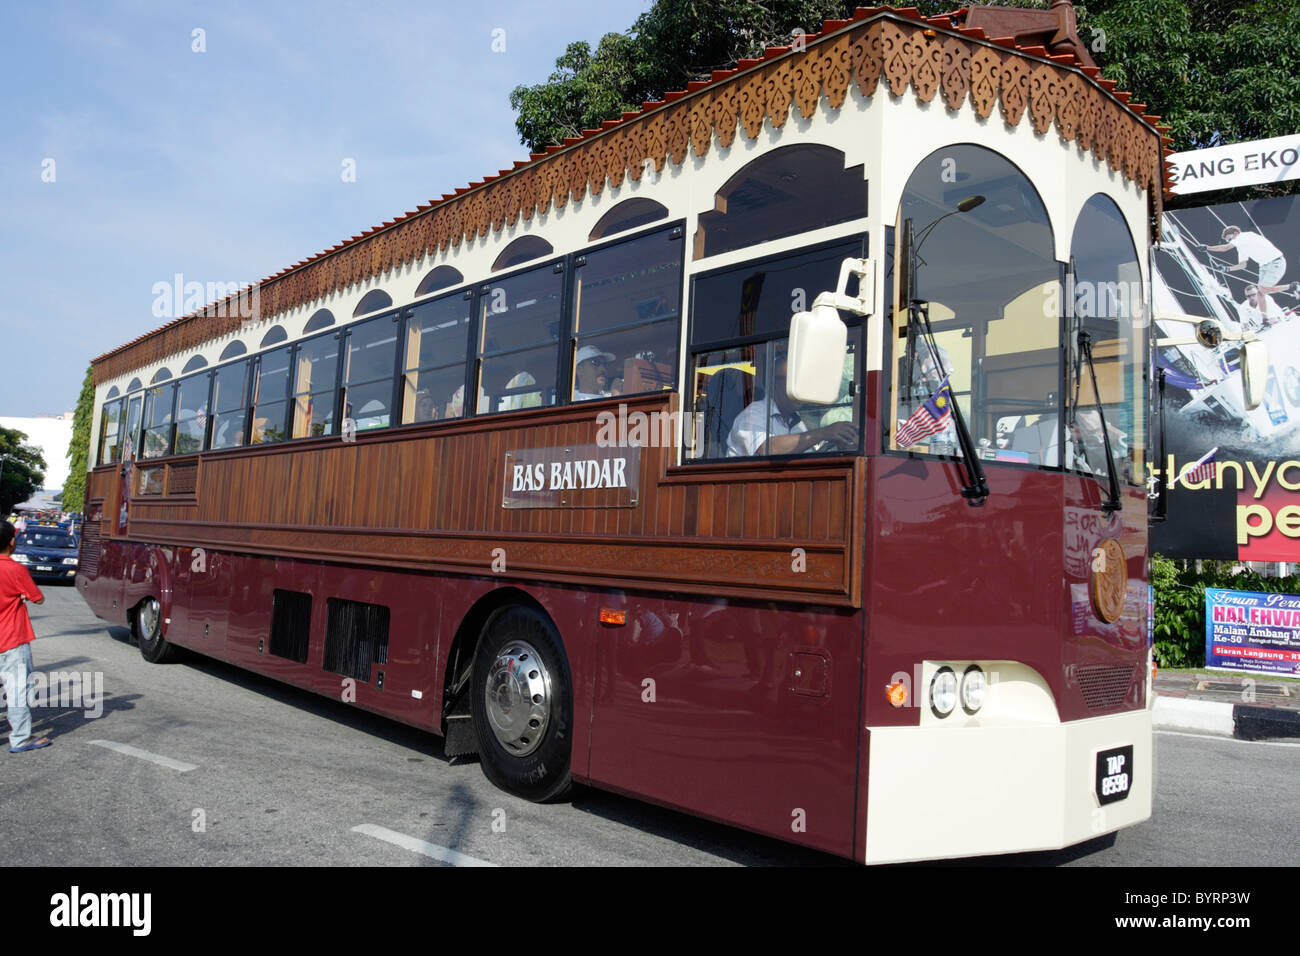 Bus in Kuala Terengganu, Malaysia, custom made in the form of traditional architecture. Stock Photo